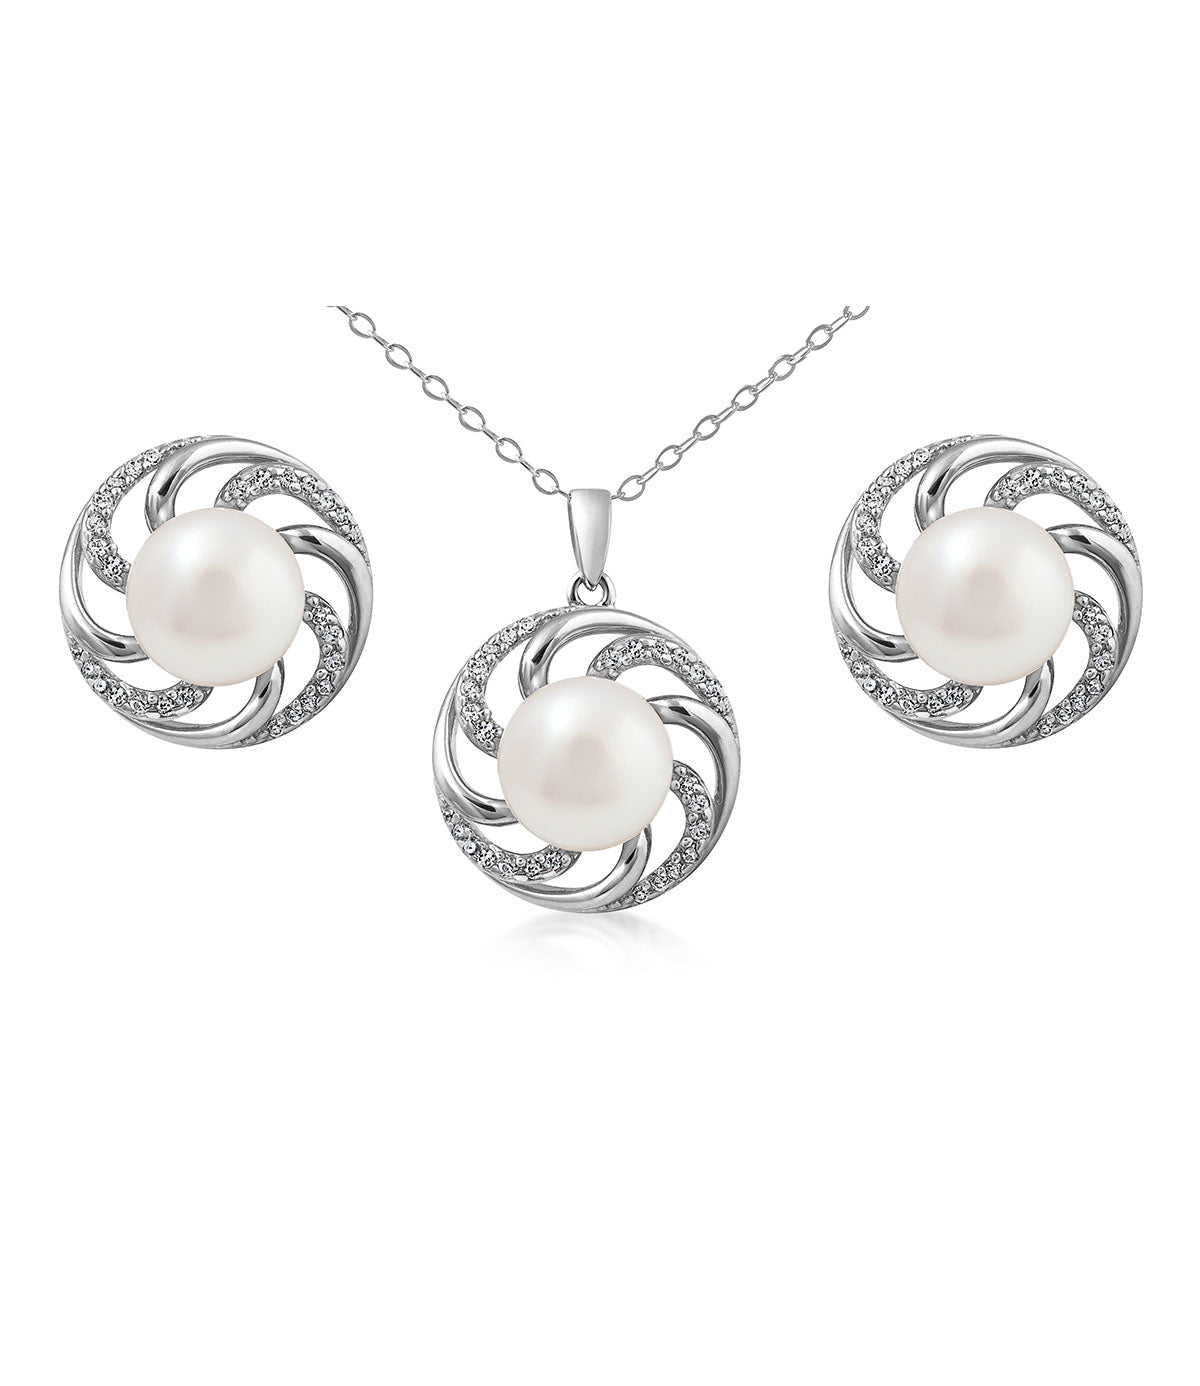 Paradis Pearl Necklace and Earrings Set in Sterling Silver